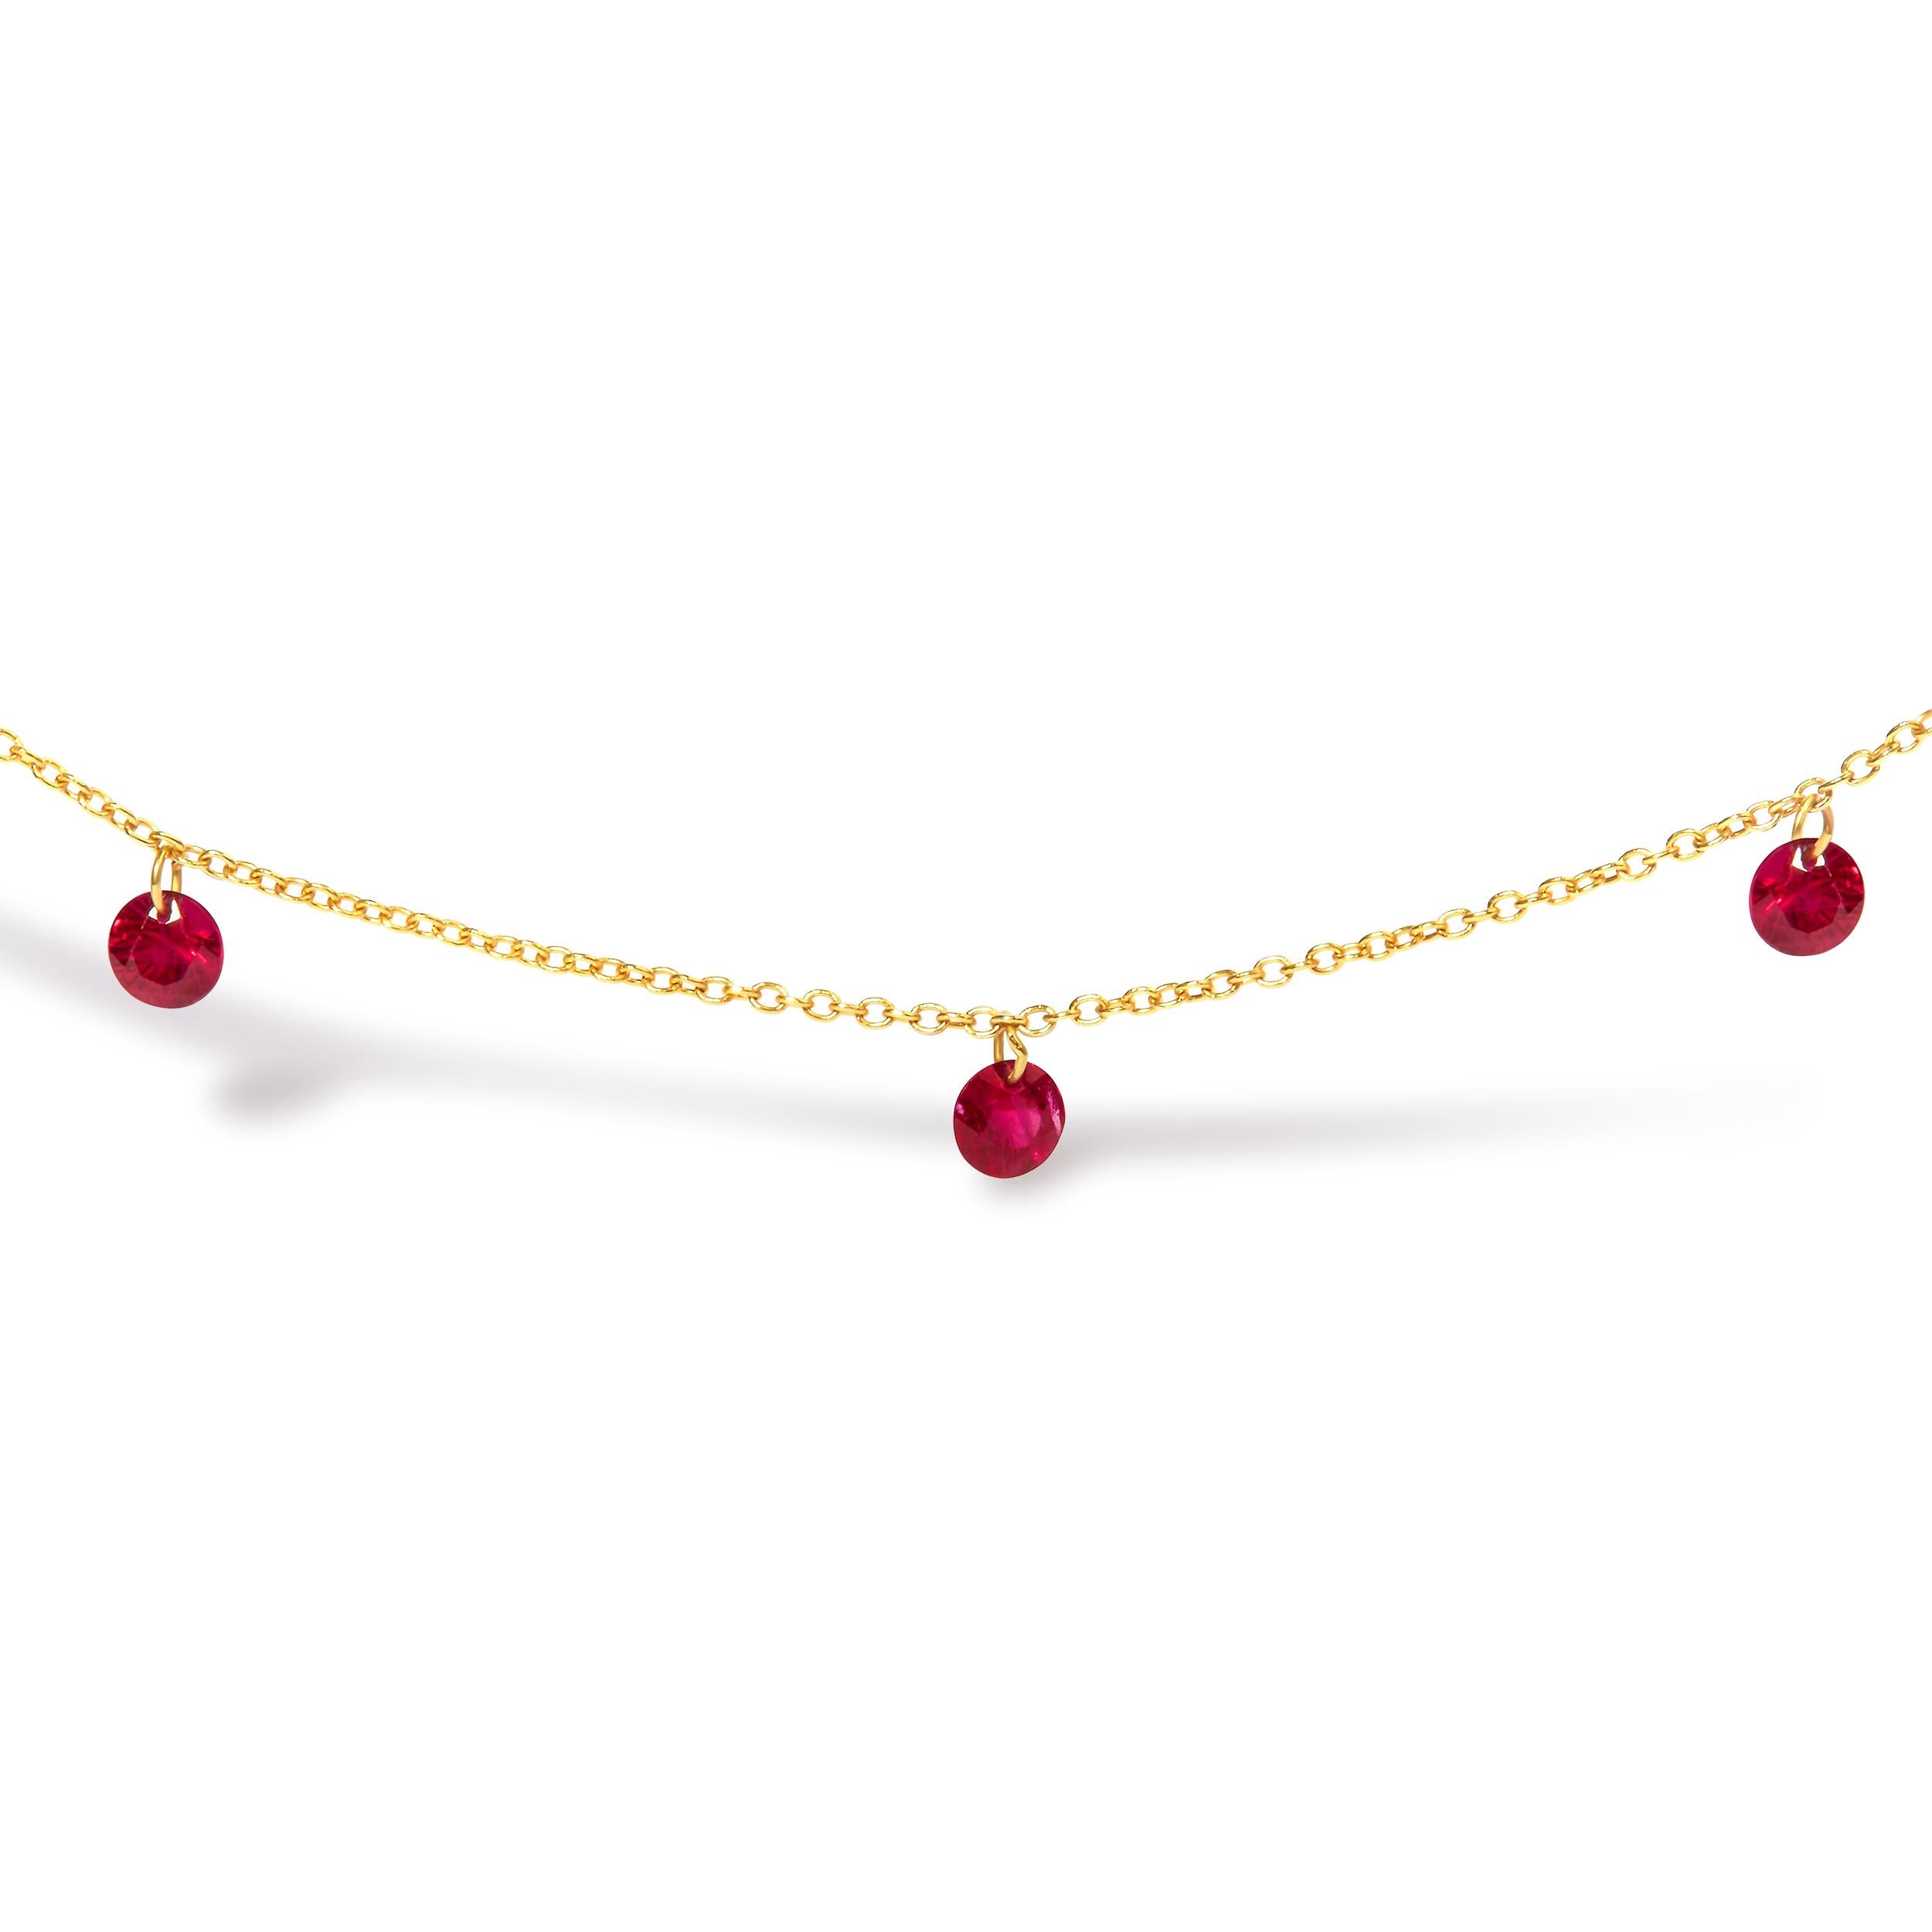 Indulge in timeless elegance with our exquisite 18K Yellow Gold Necklace adorned with a captivating 1 1/3 Cttw Dangling Ruby Drop. Crafted from luxurious 18K yellow gold, this collar necklace is a true statement piece, perfect for the modern woman